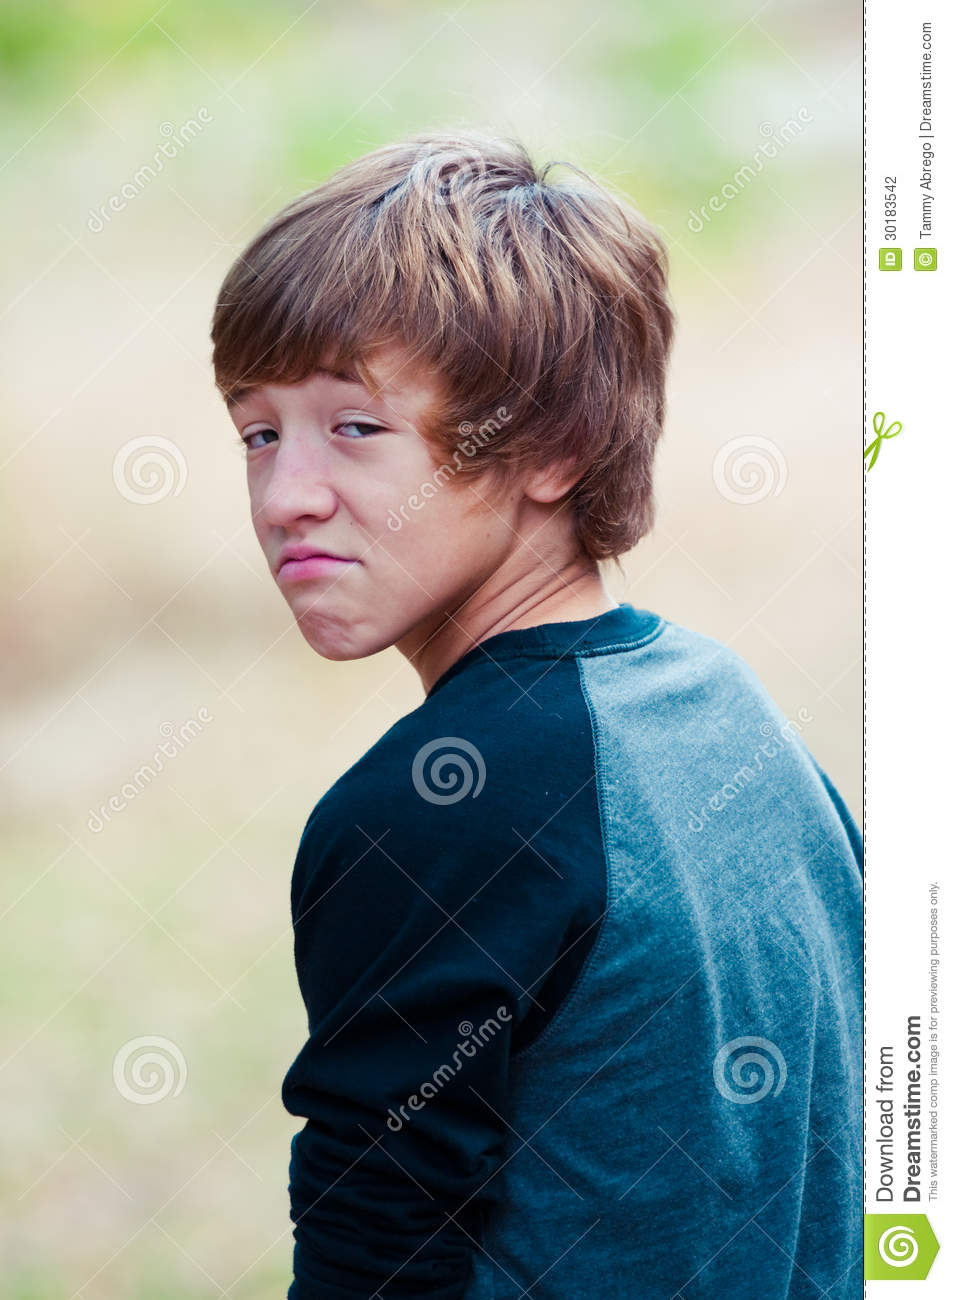 Young Teen Looking At Camera With Frown Face Stock Photography   Image